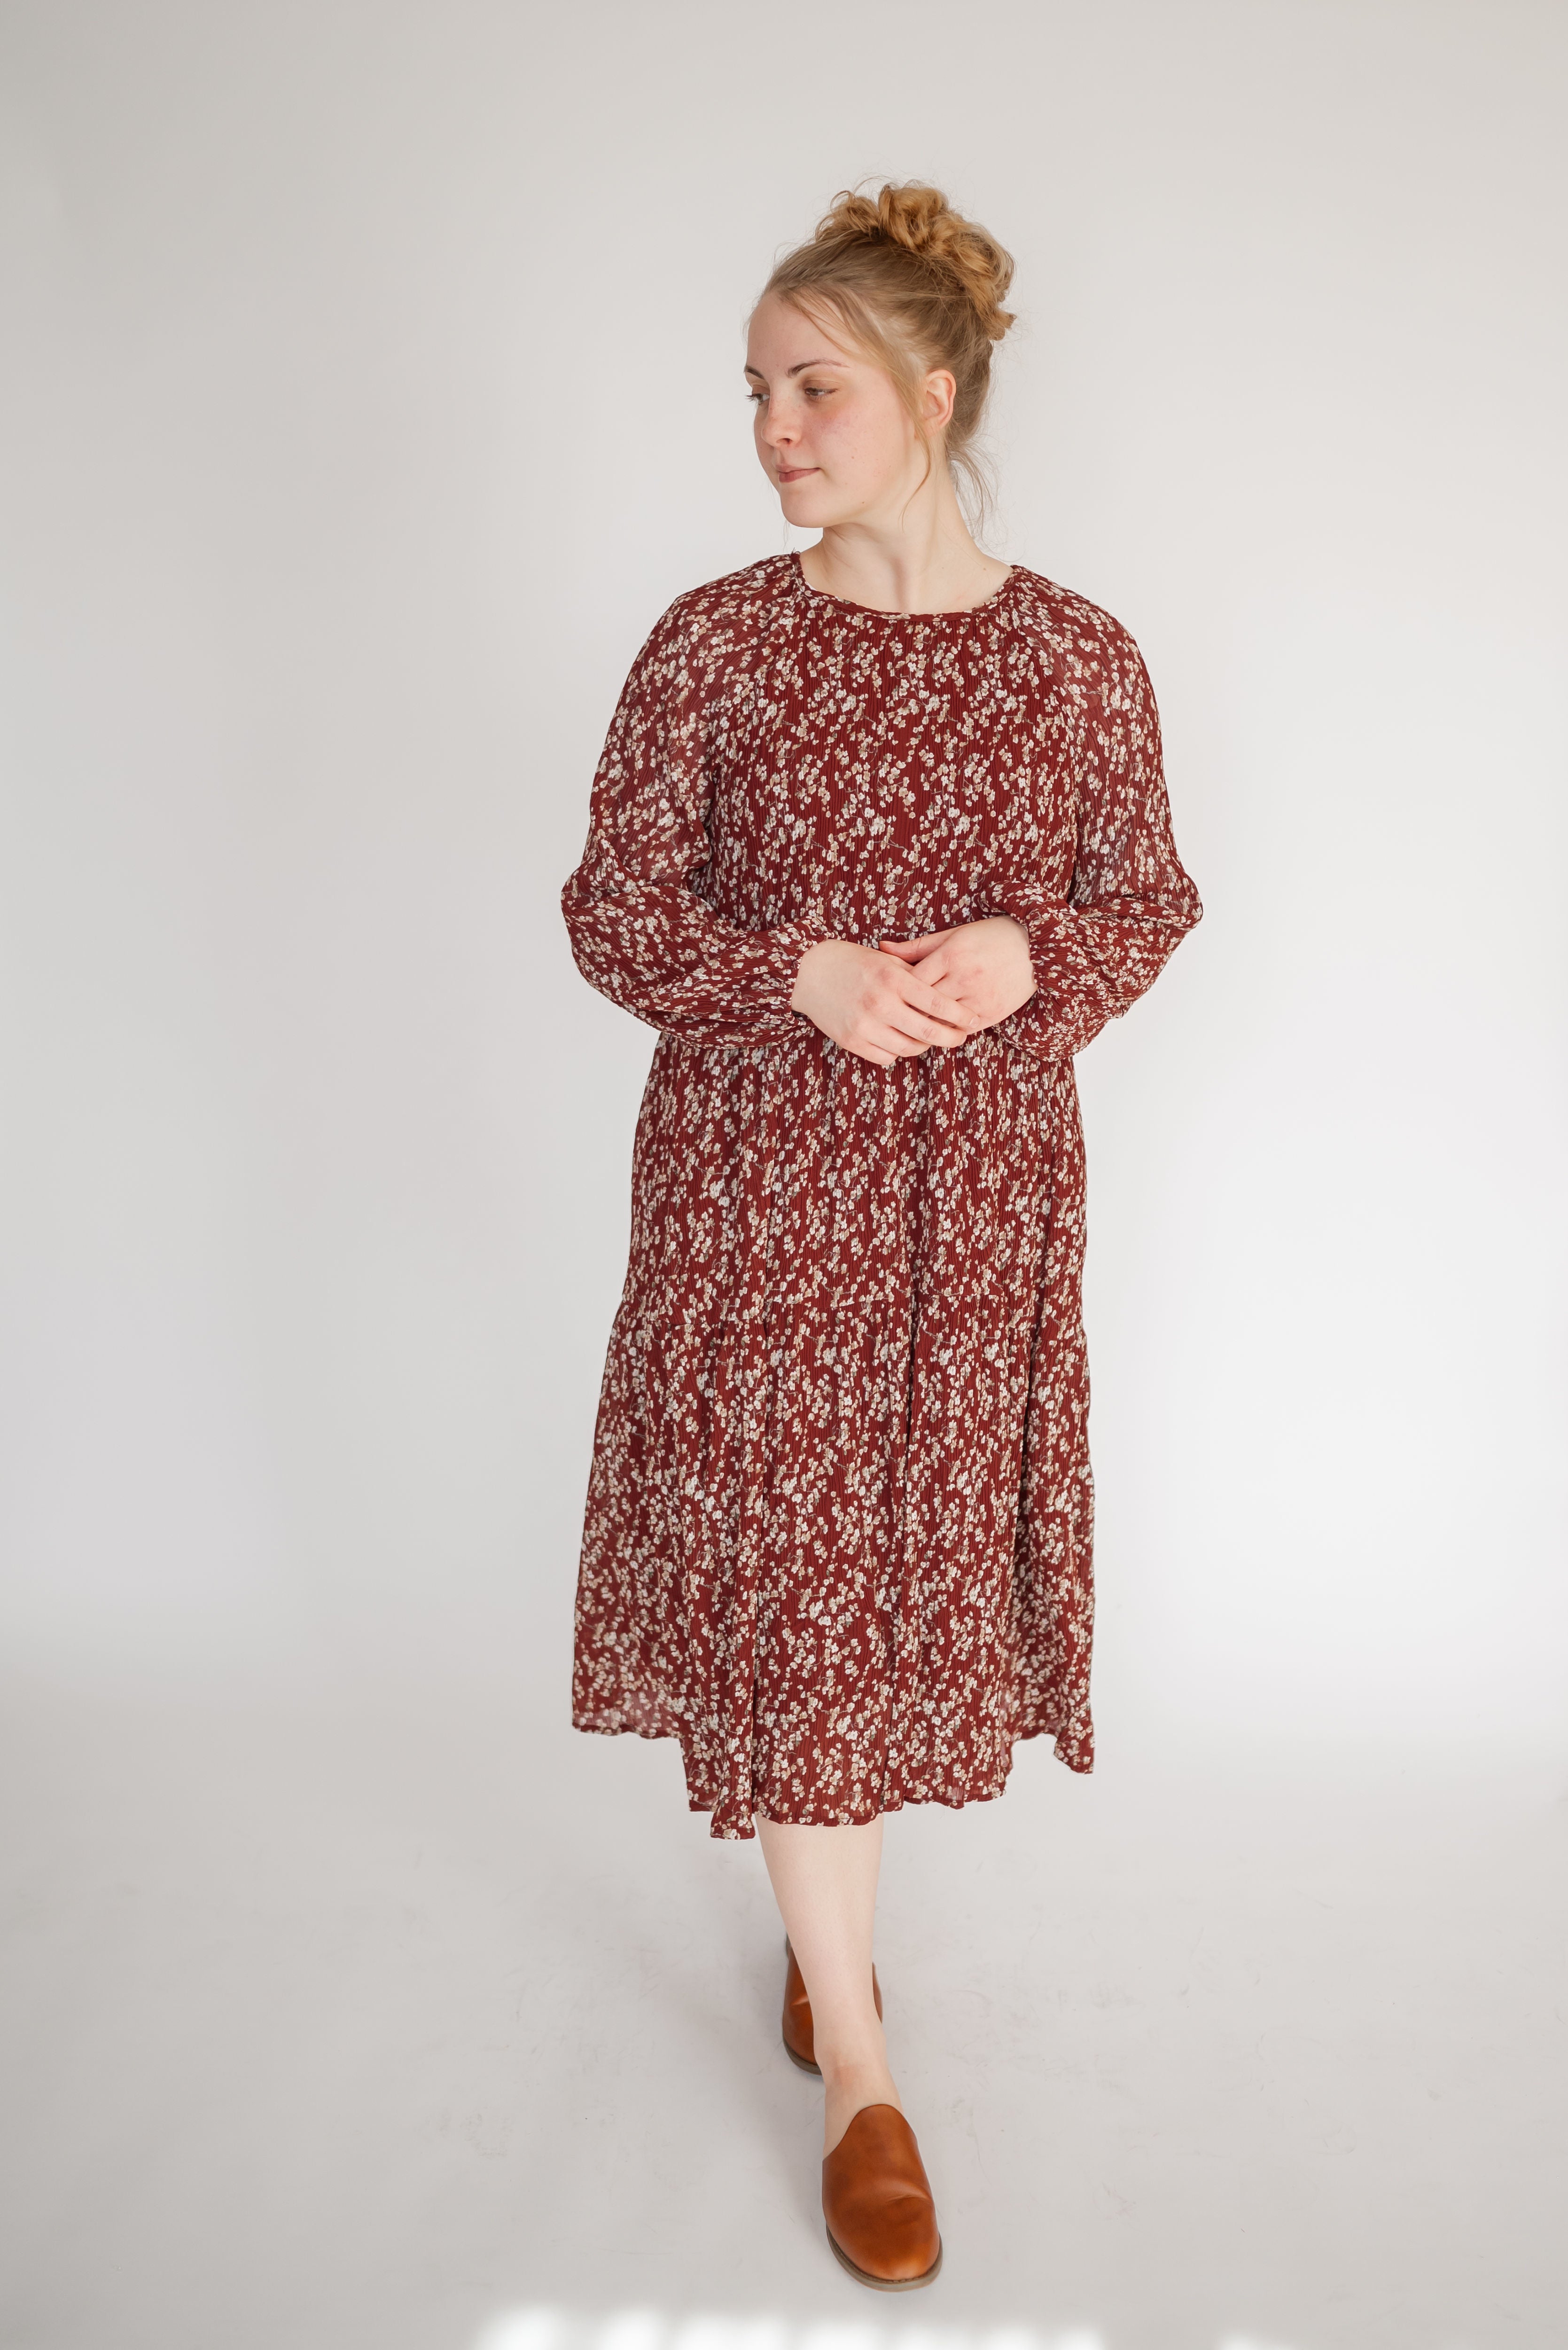 Everleigh Floral Tiered Midi Dress in Burgundy - FINAL SALE